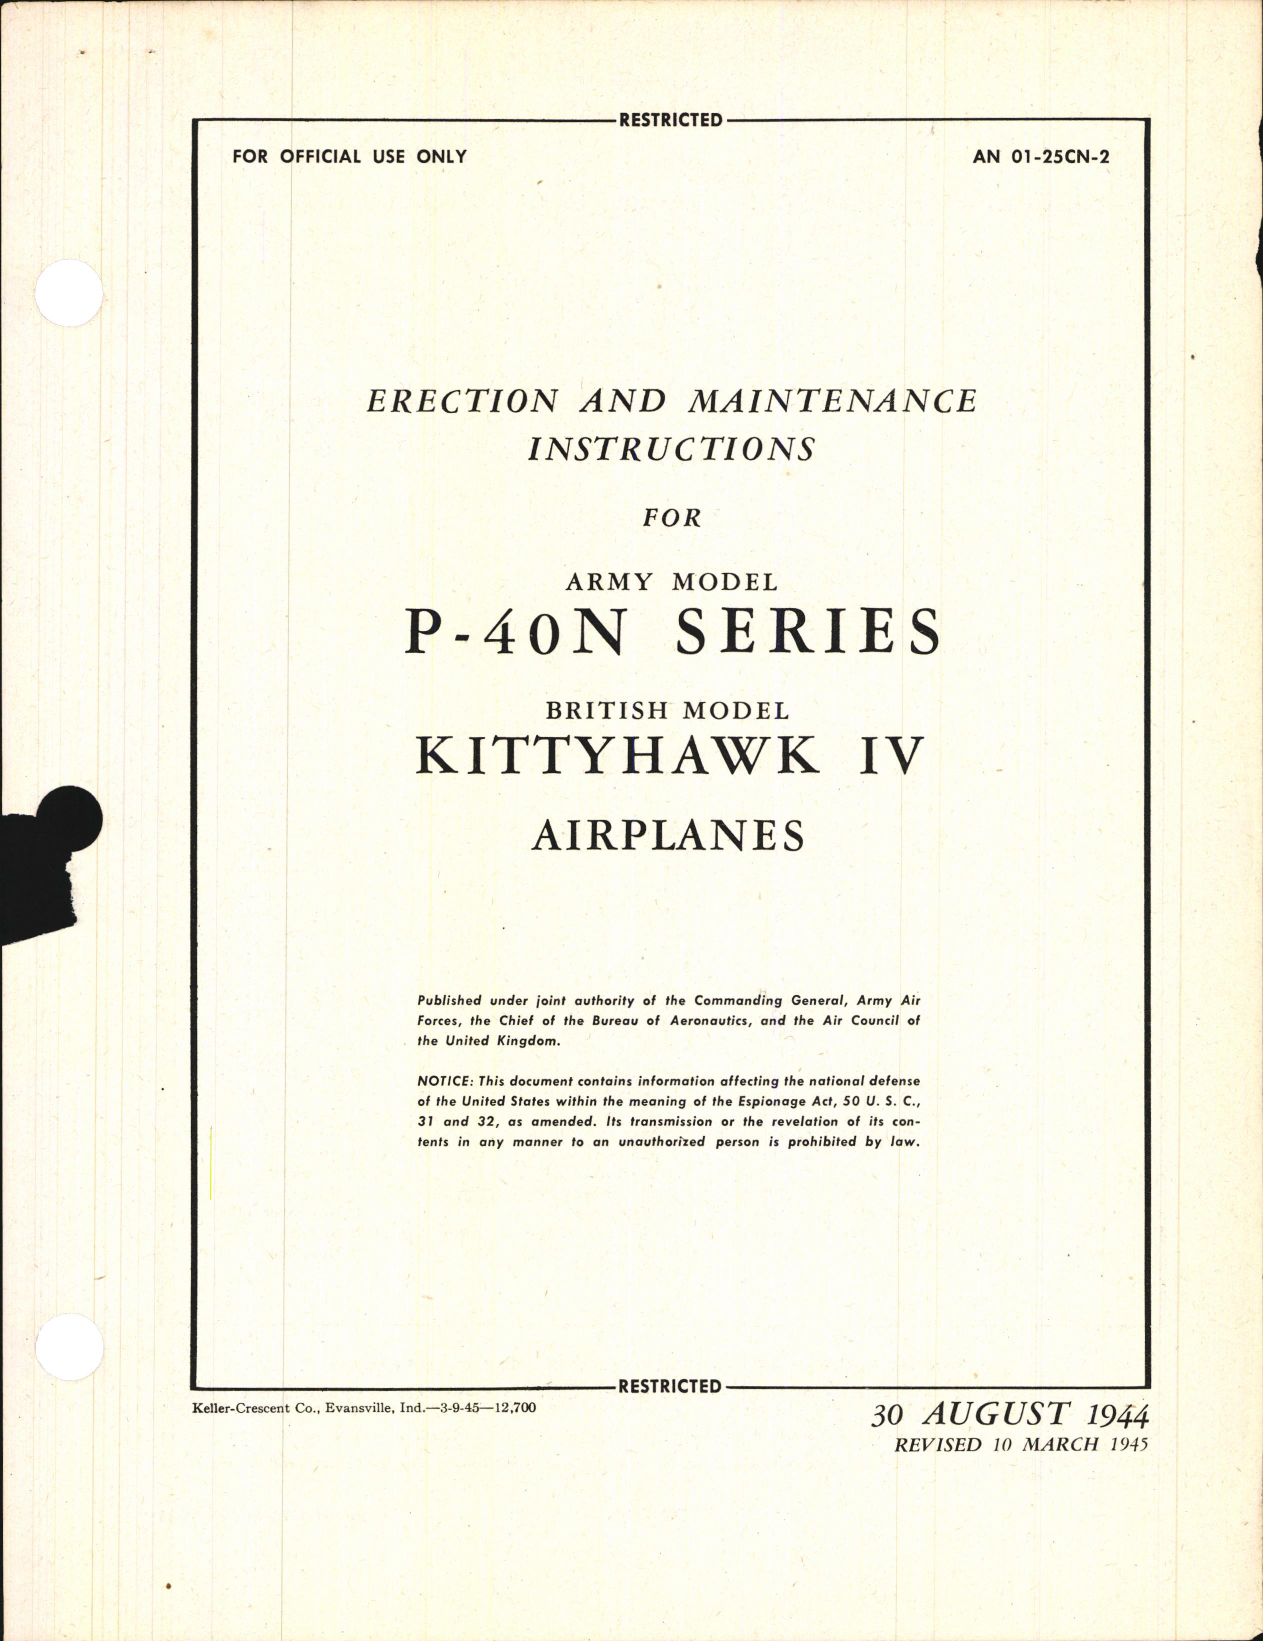 Sample page 1 from AirCorps Library document: Erection & Maintenance Instructions for P-40N Series, Kittyhawk IV